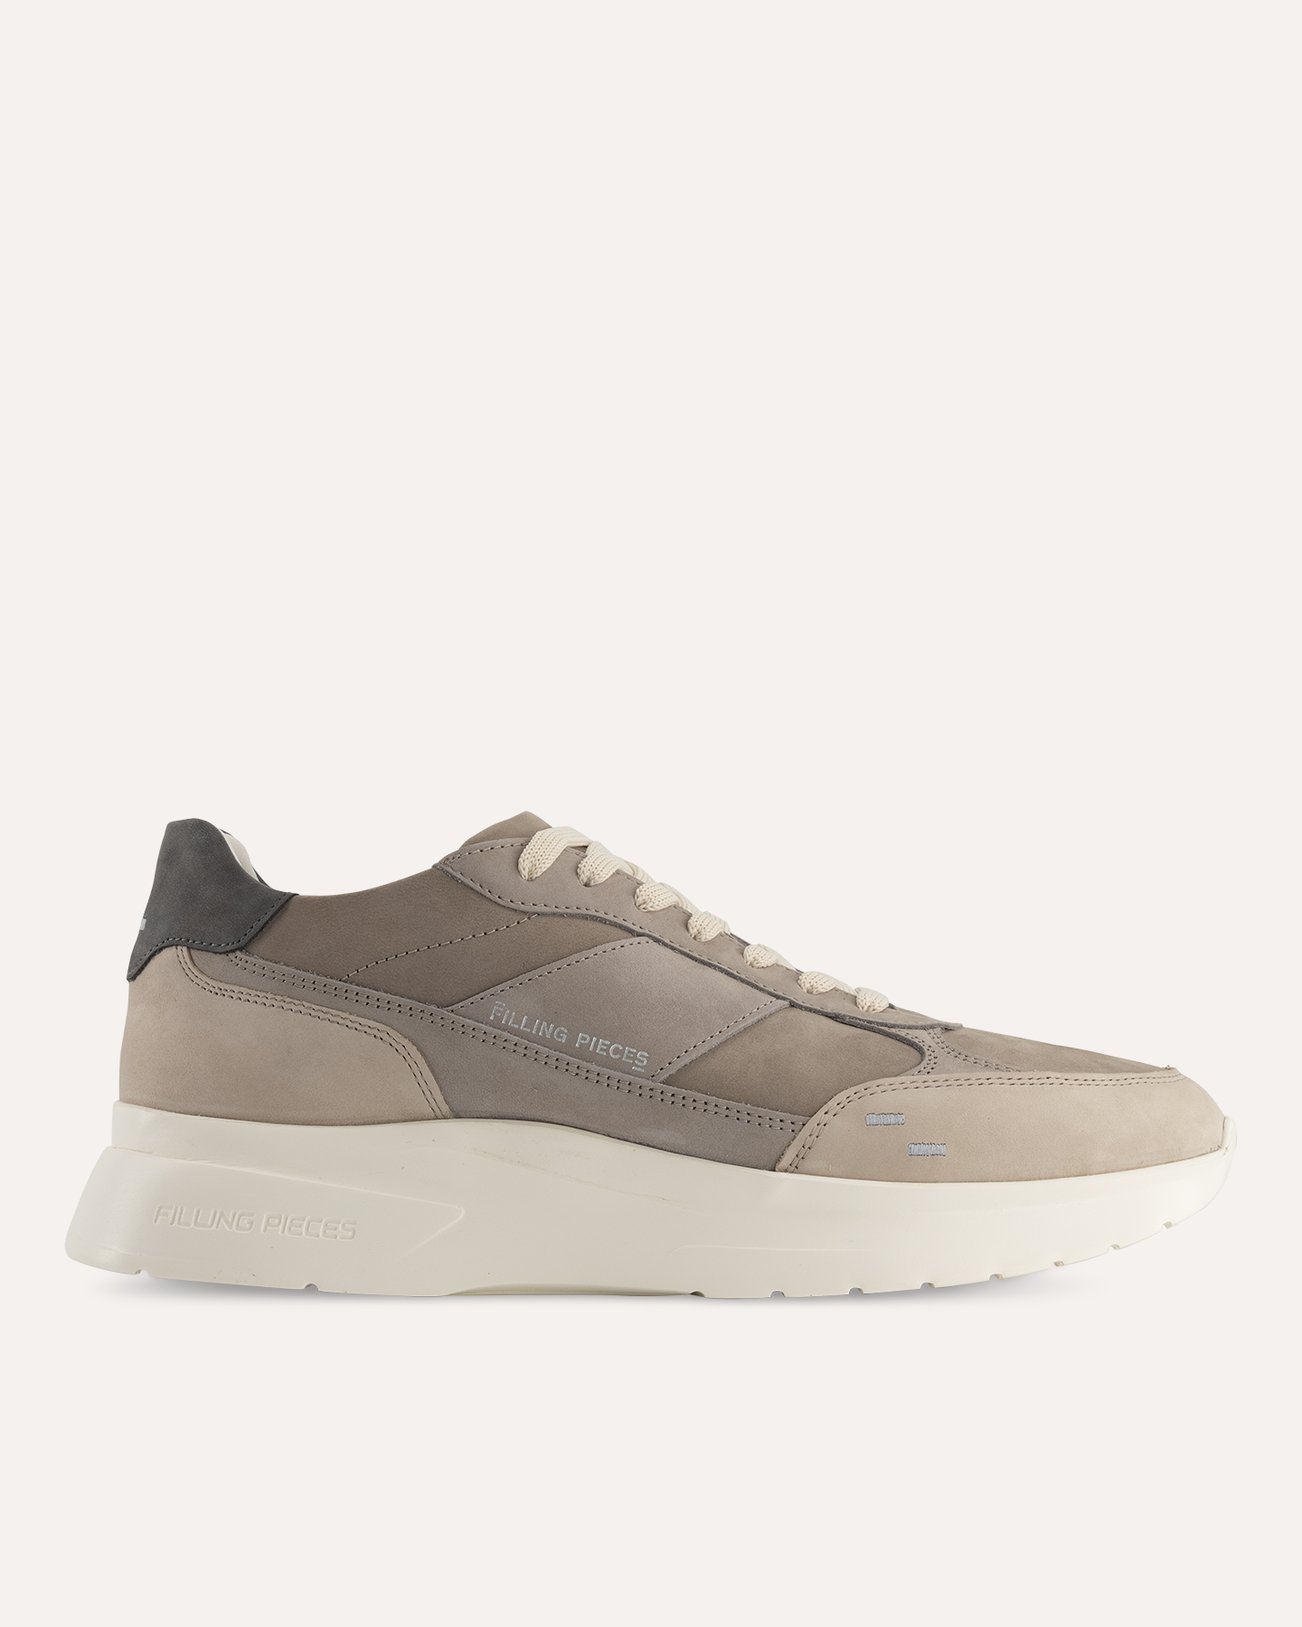 Filling Pieces Jet Runner TAUPE 1